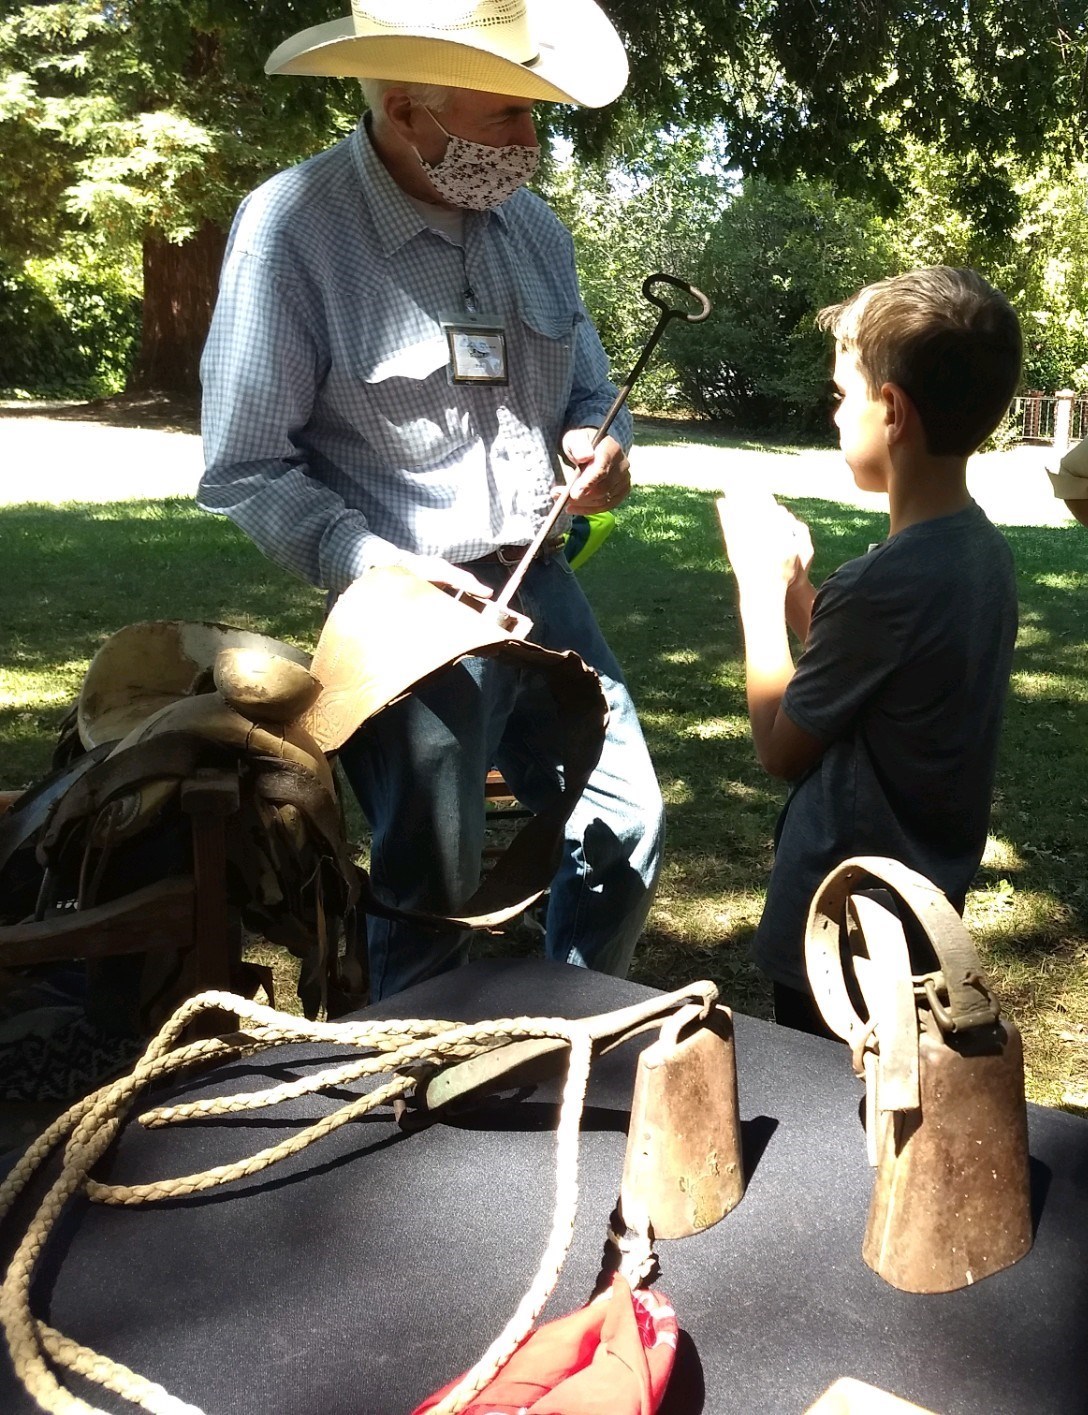 Paul sharing a branding iron and ranching tools with a camper during Camp Adobe.